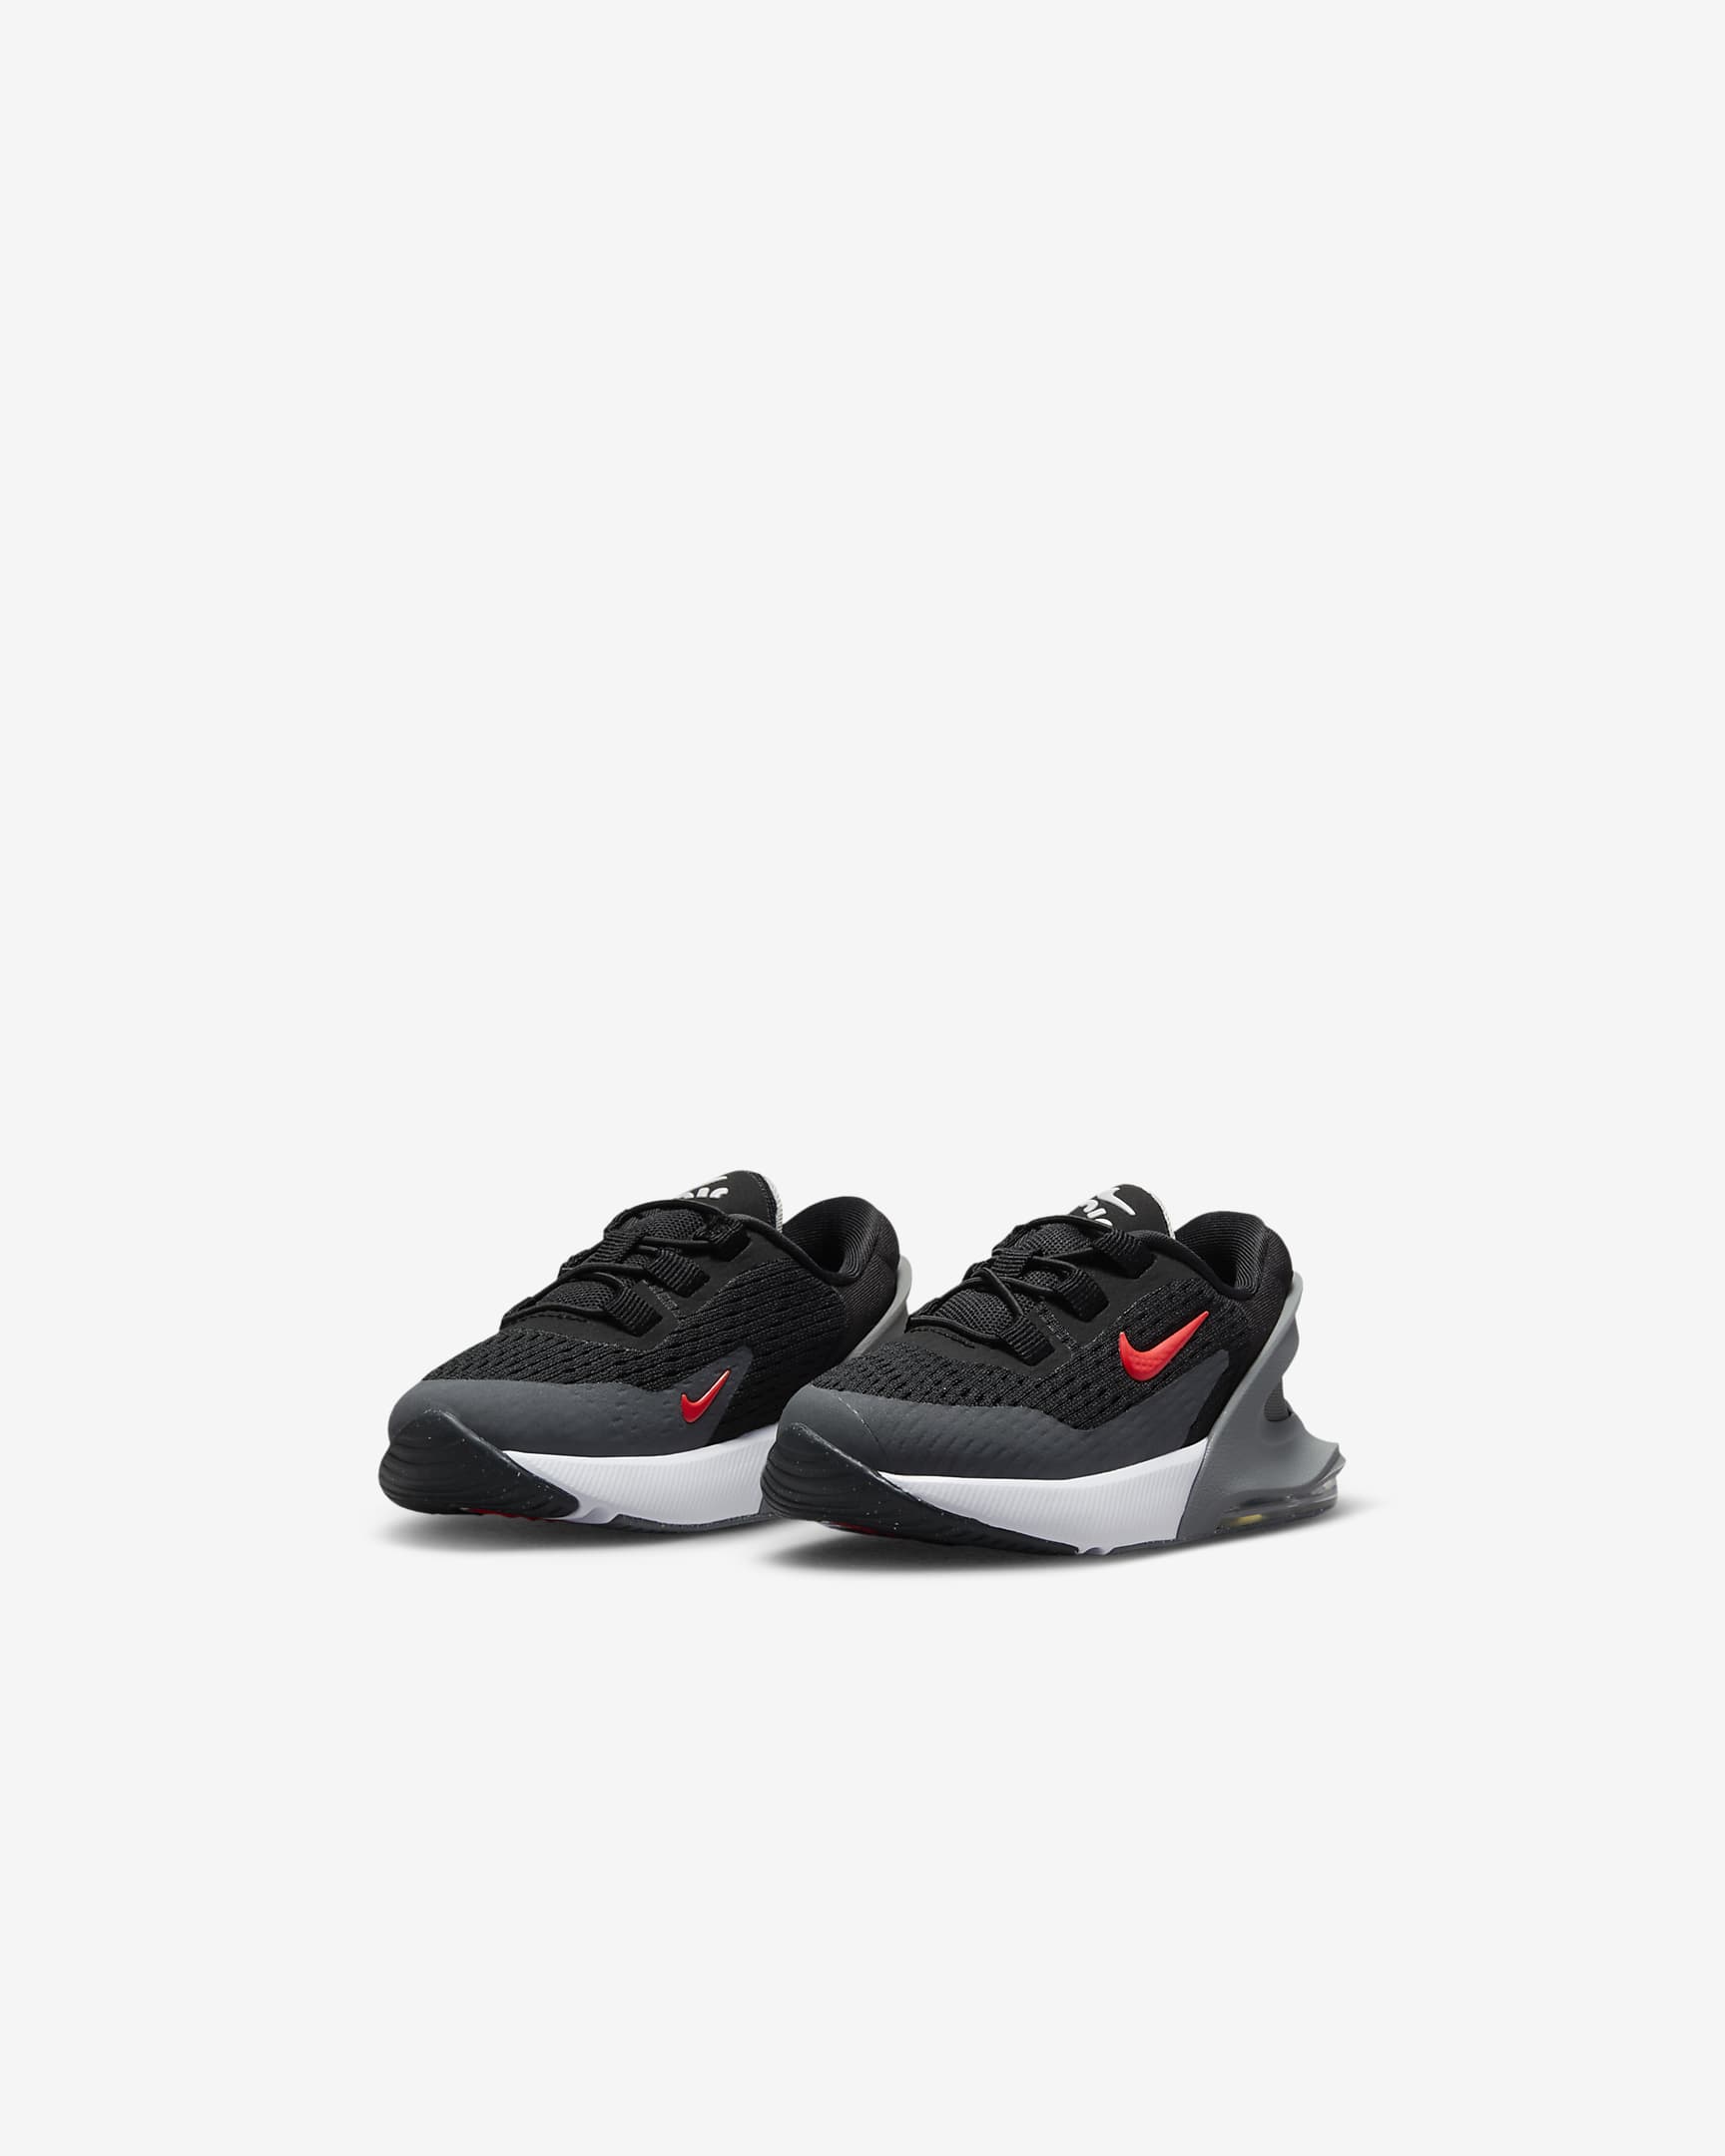 Nike Air Max 270 GO Baby/Toddler Easy On/Off Shoes - Black/Smoke Grey/Anthracite/Bright Crimson